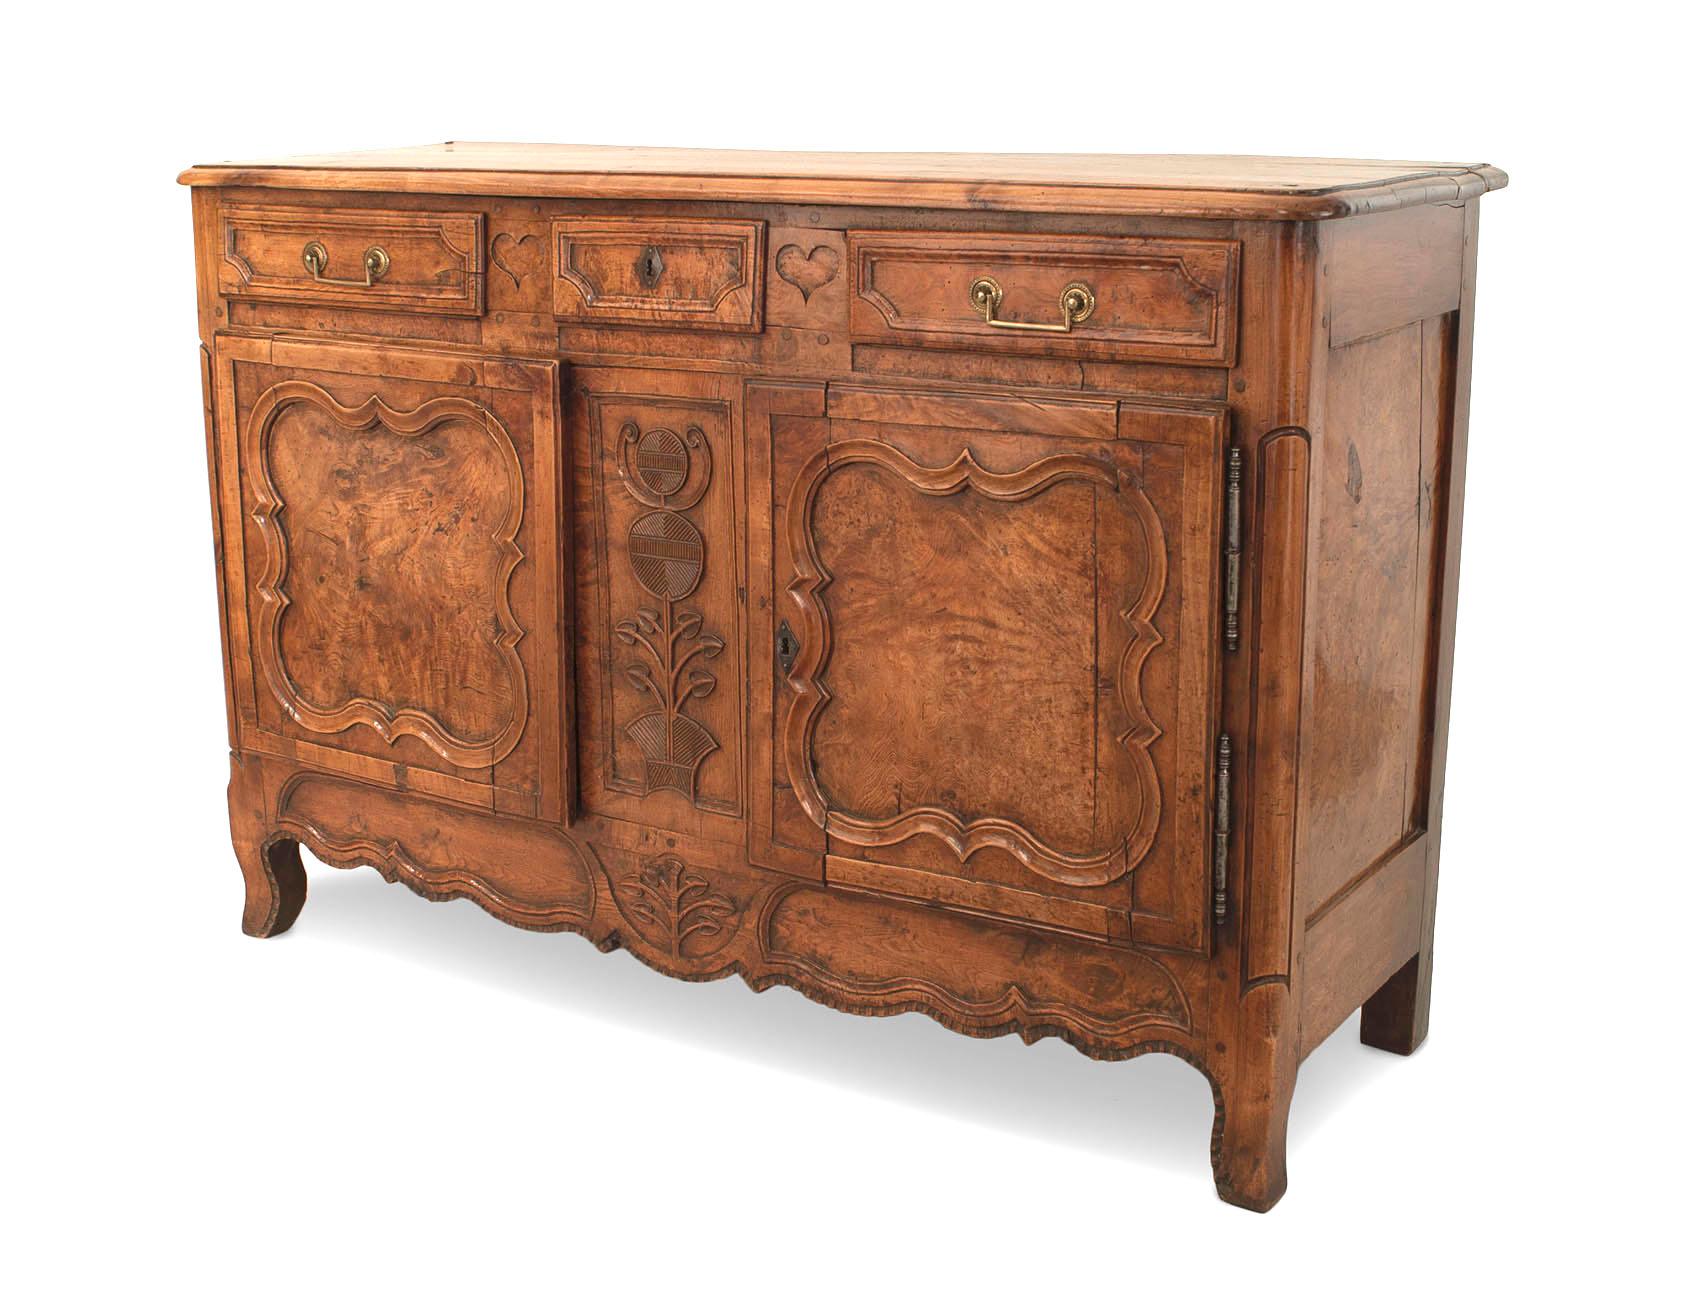 French Provincial Louis XV (18th Century) walnut commode with 2 doors having burl walnut panels separated by a carved center panel under 3 drawers.
